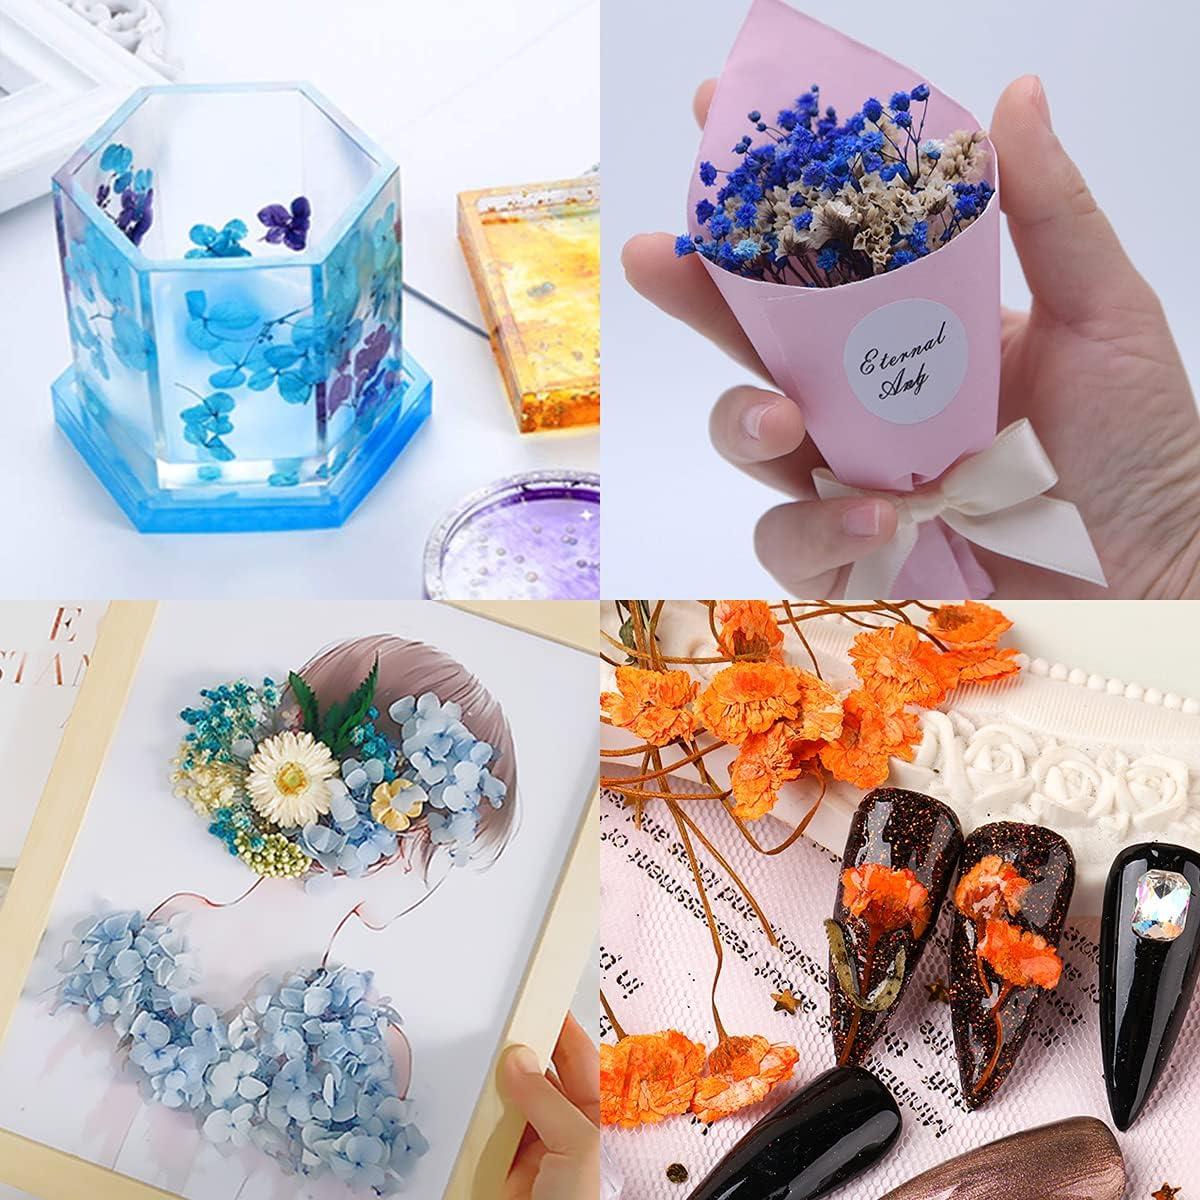 Dried Flowers for Resin 2 Box Mixed Multiple Assorted Real Flowers Dried  Flowers for Candles Jewelry Crafts Scrapbooking Decoration Craft Flowers